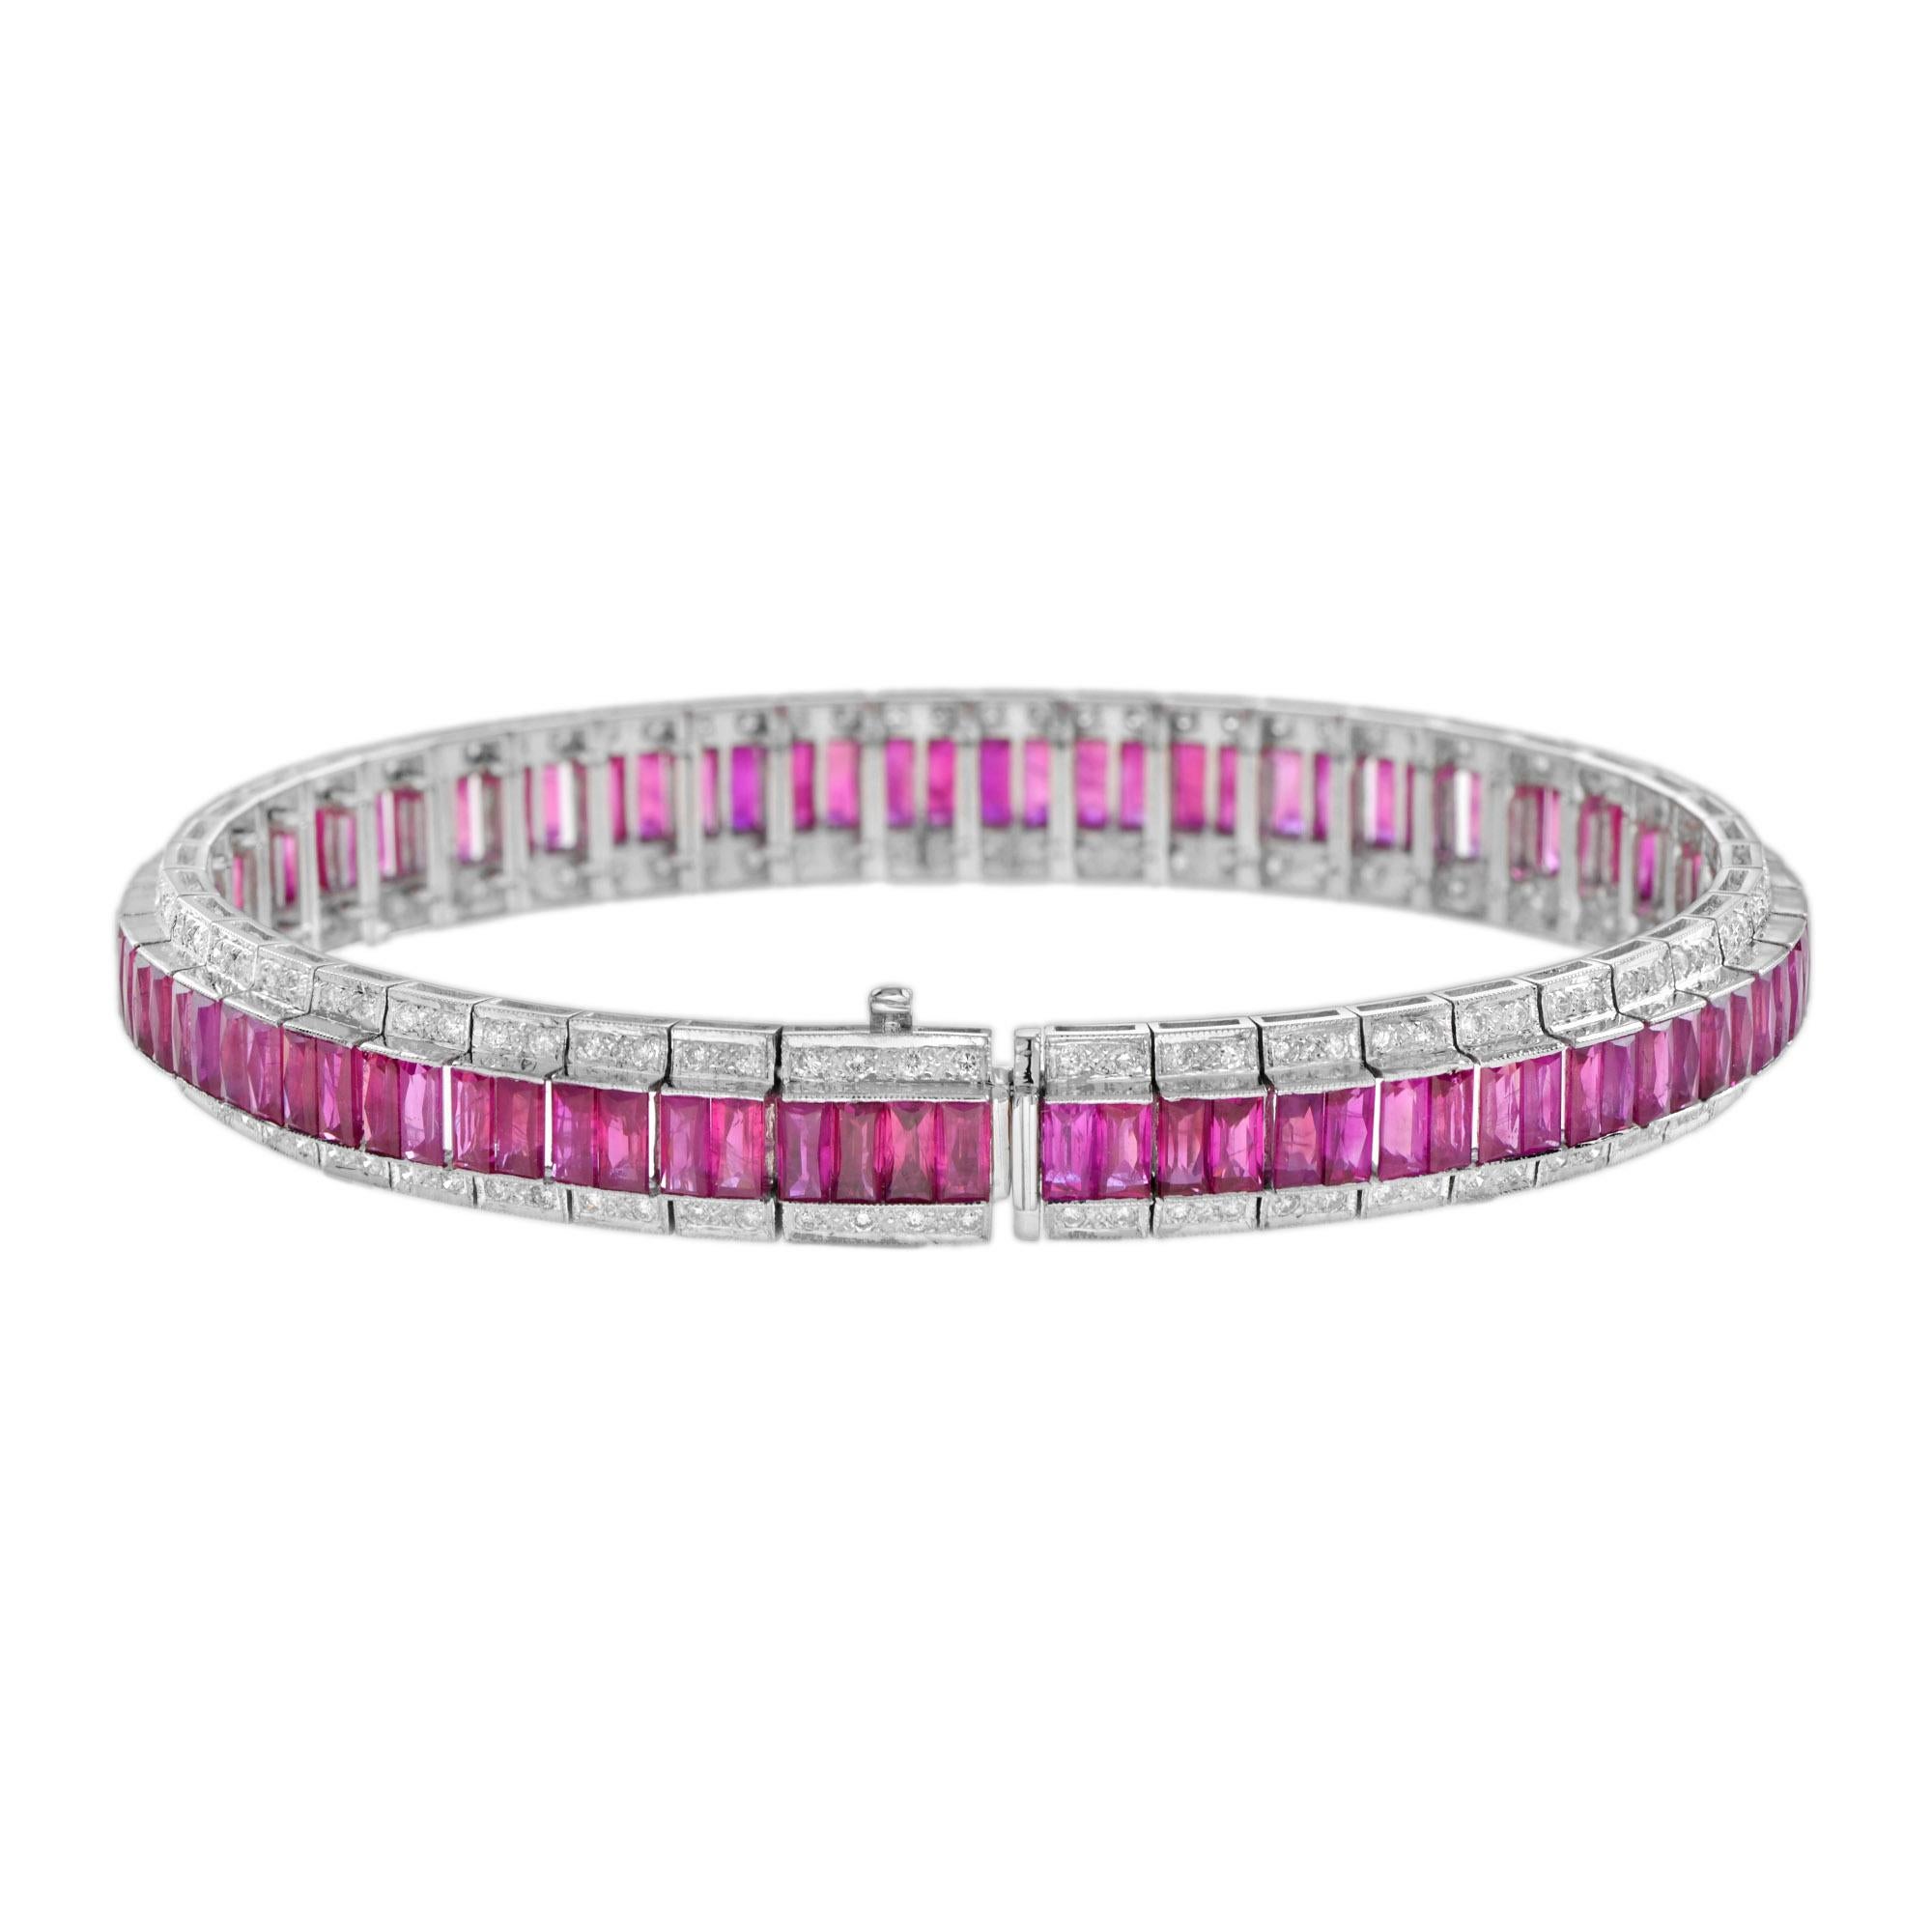 French Cut Art Deco Style 16.69 Ct. Ruby and Diamond Bracelet in 18K White Gold